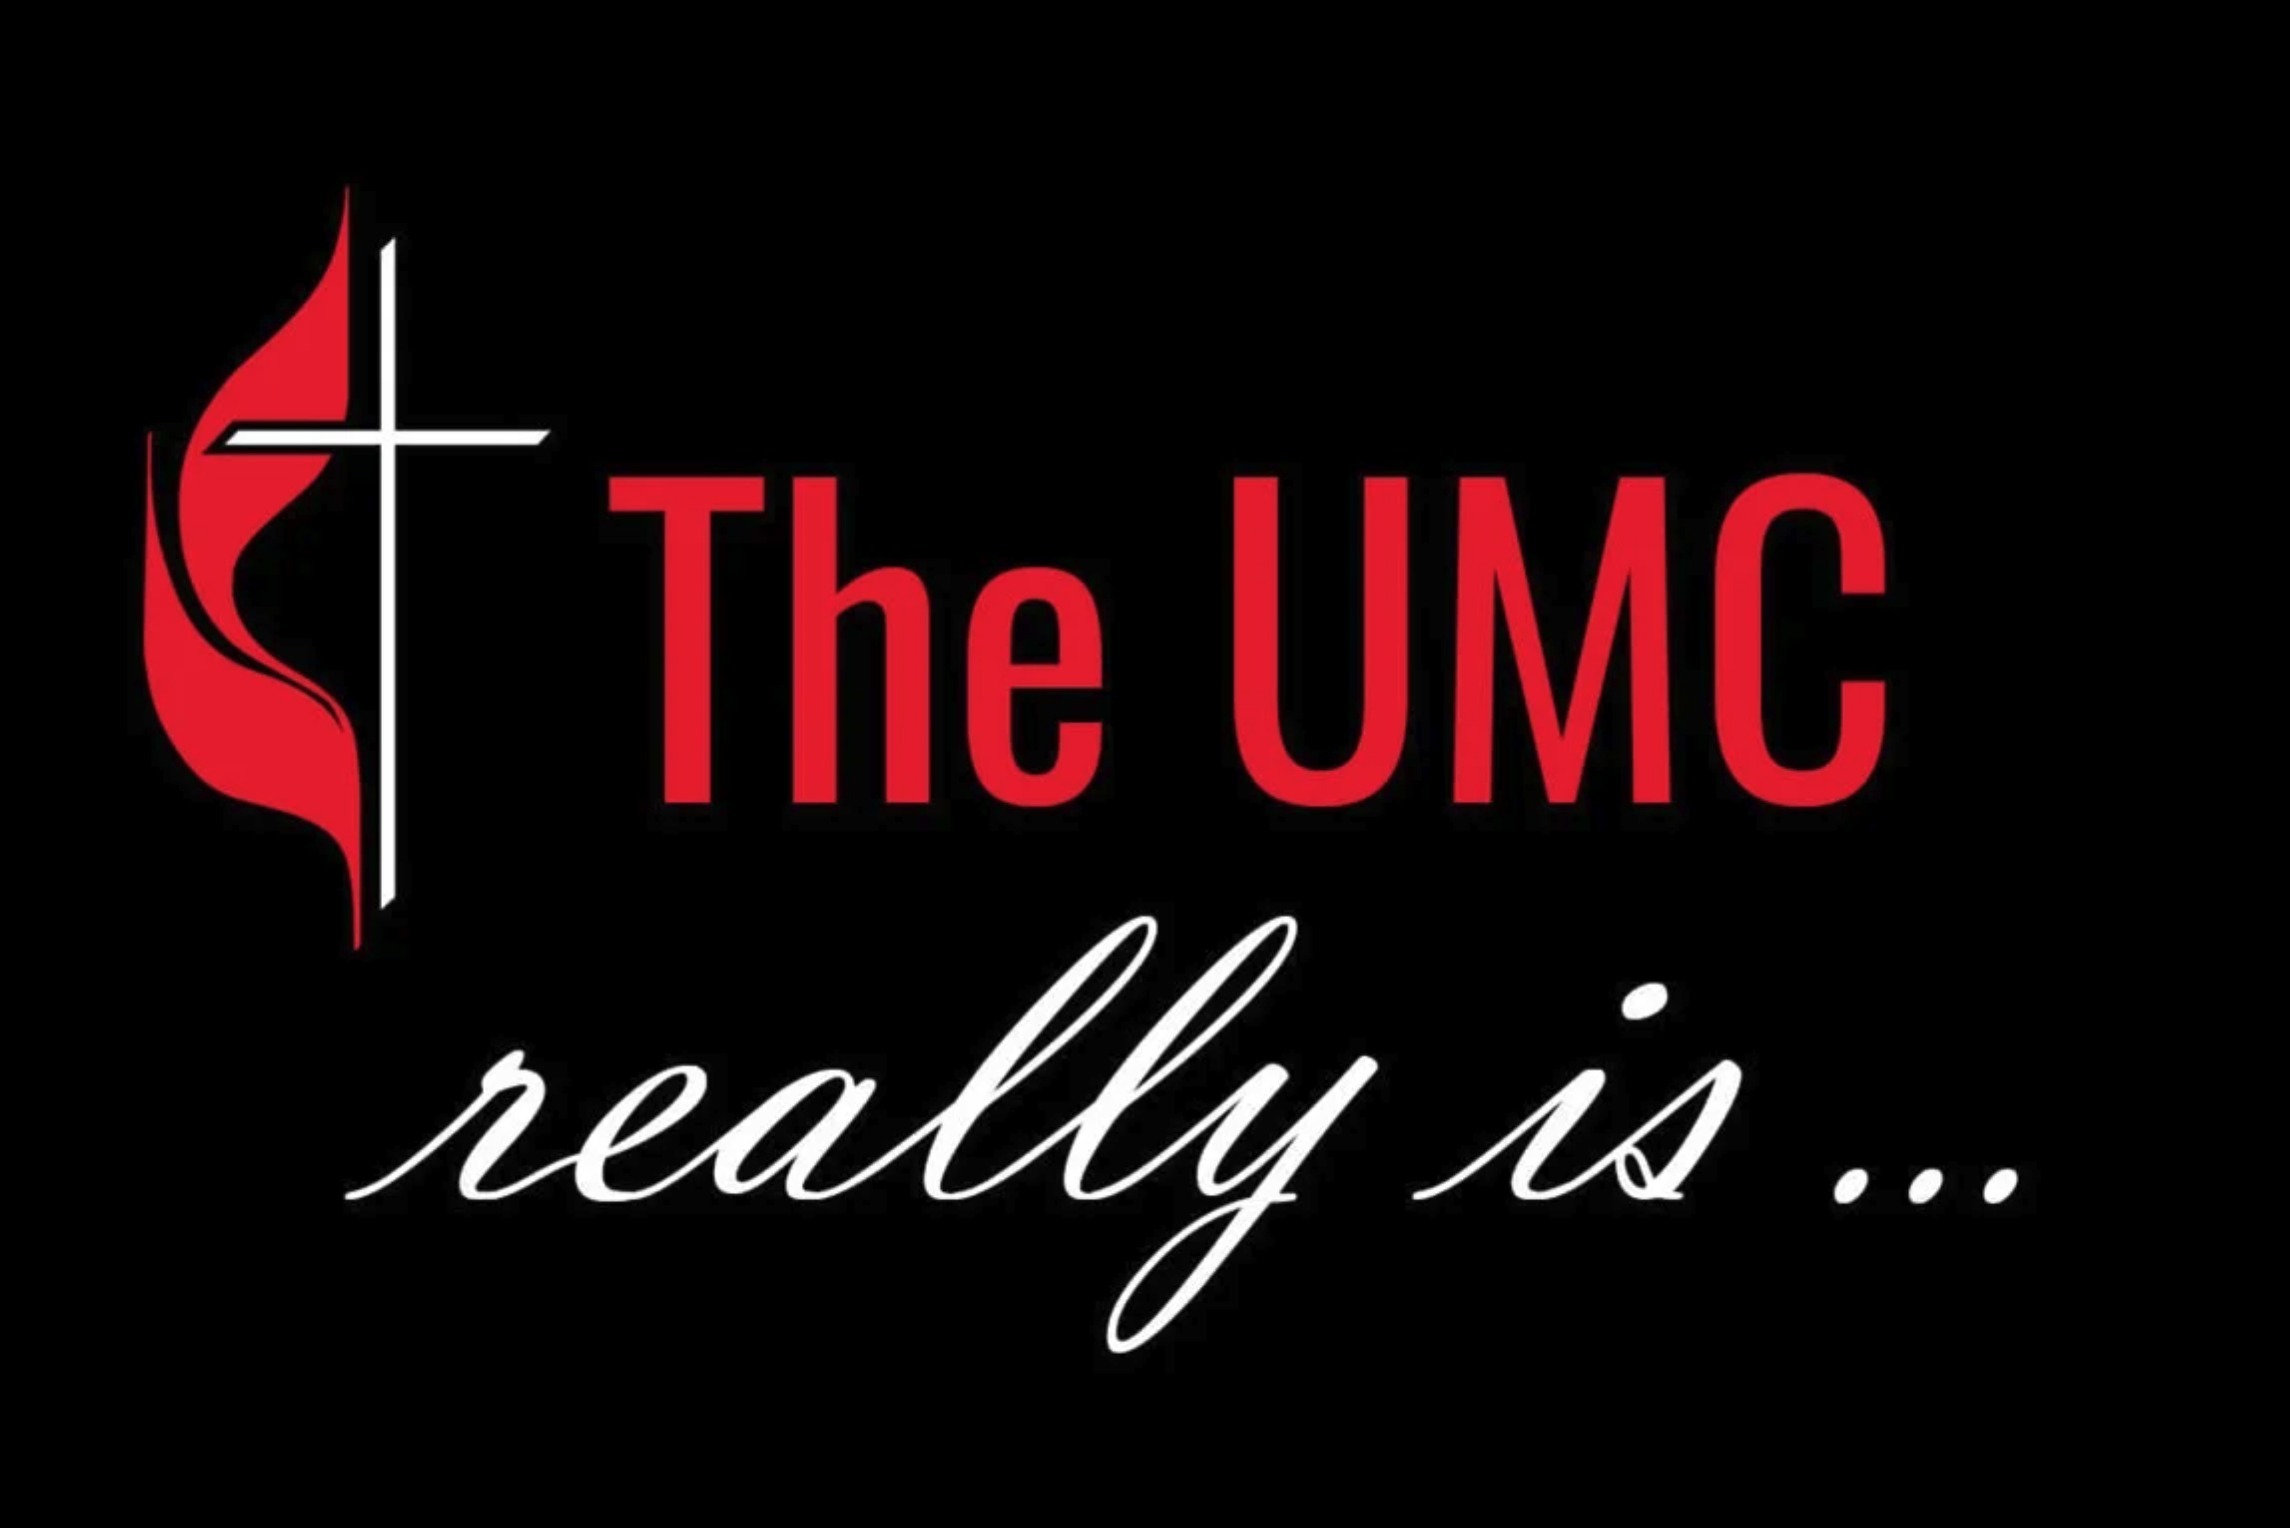 Ask The Umc The Umc Really Is Graphic Digest560pxjpg